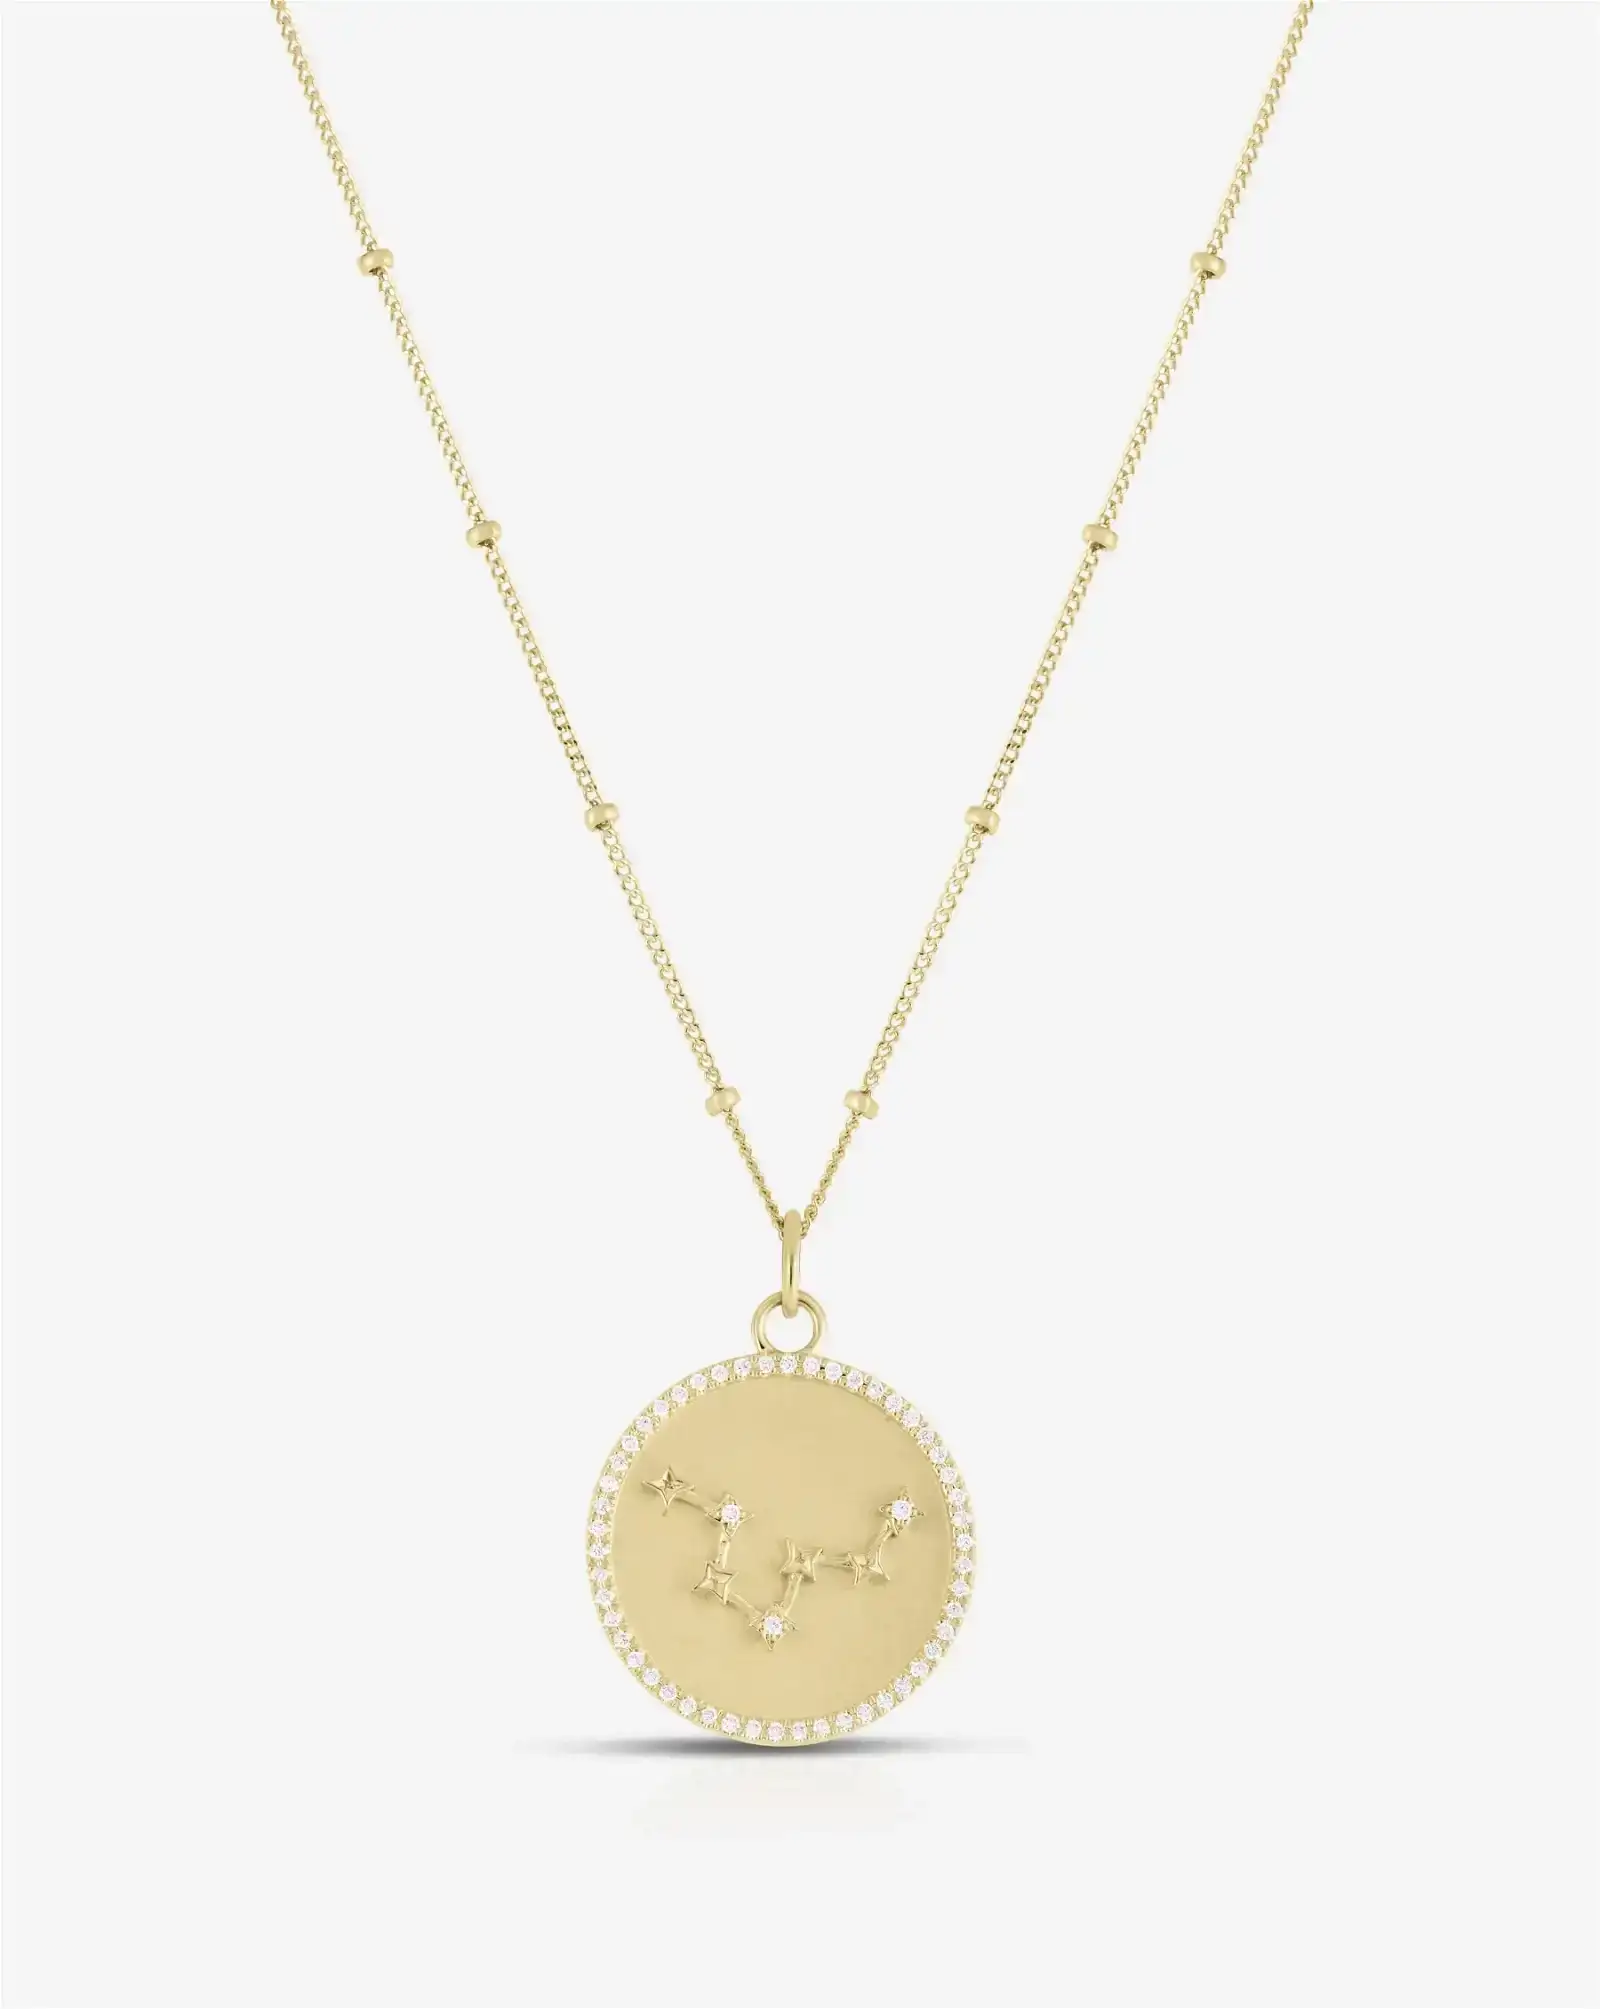 Image of Zodiac Constellation Necklace